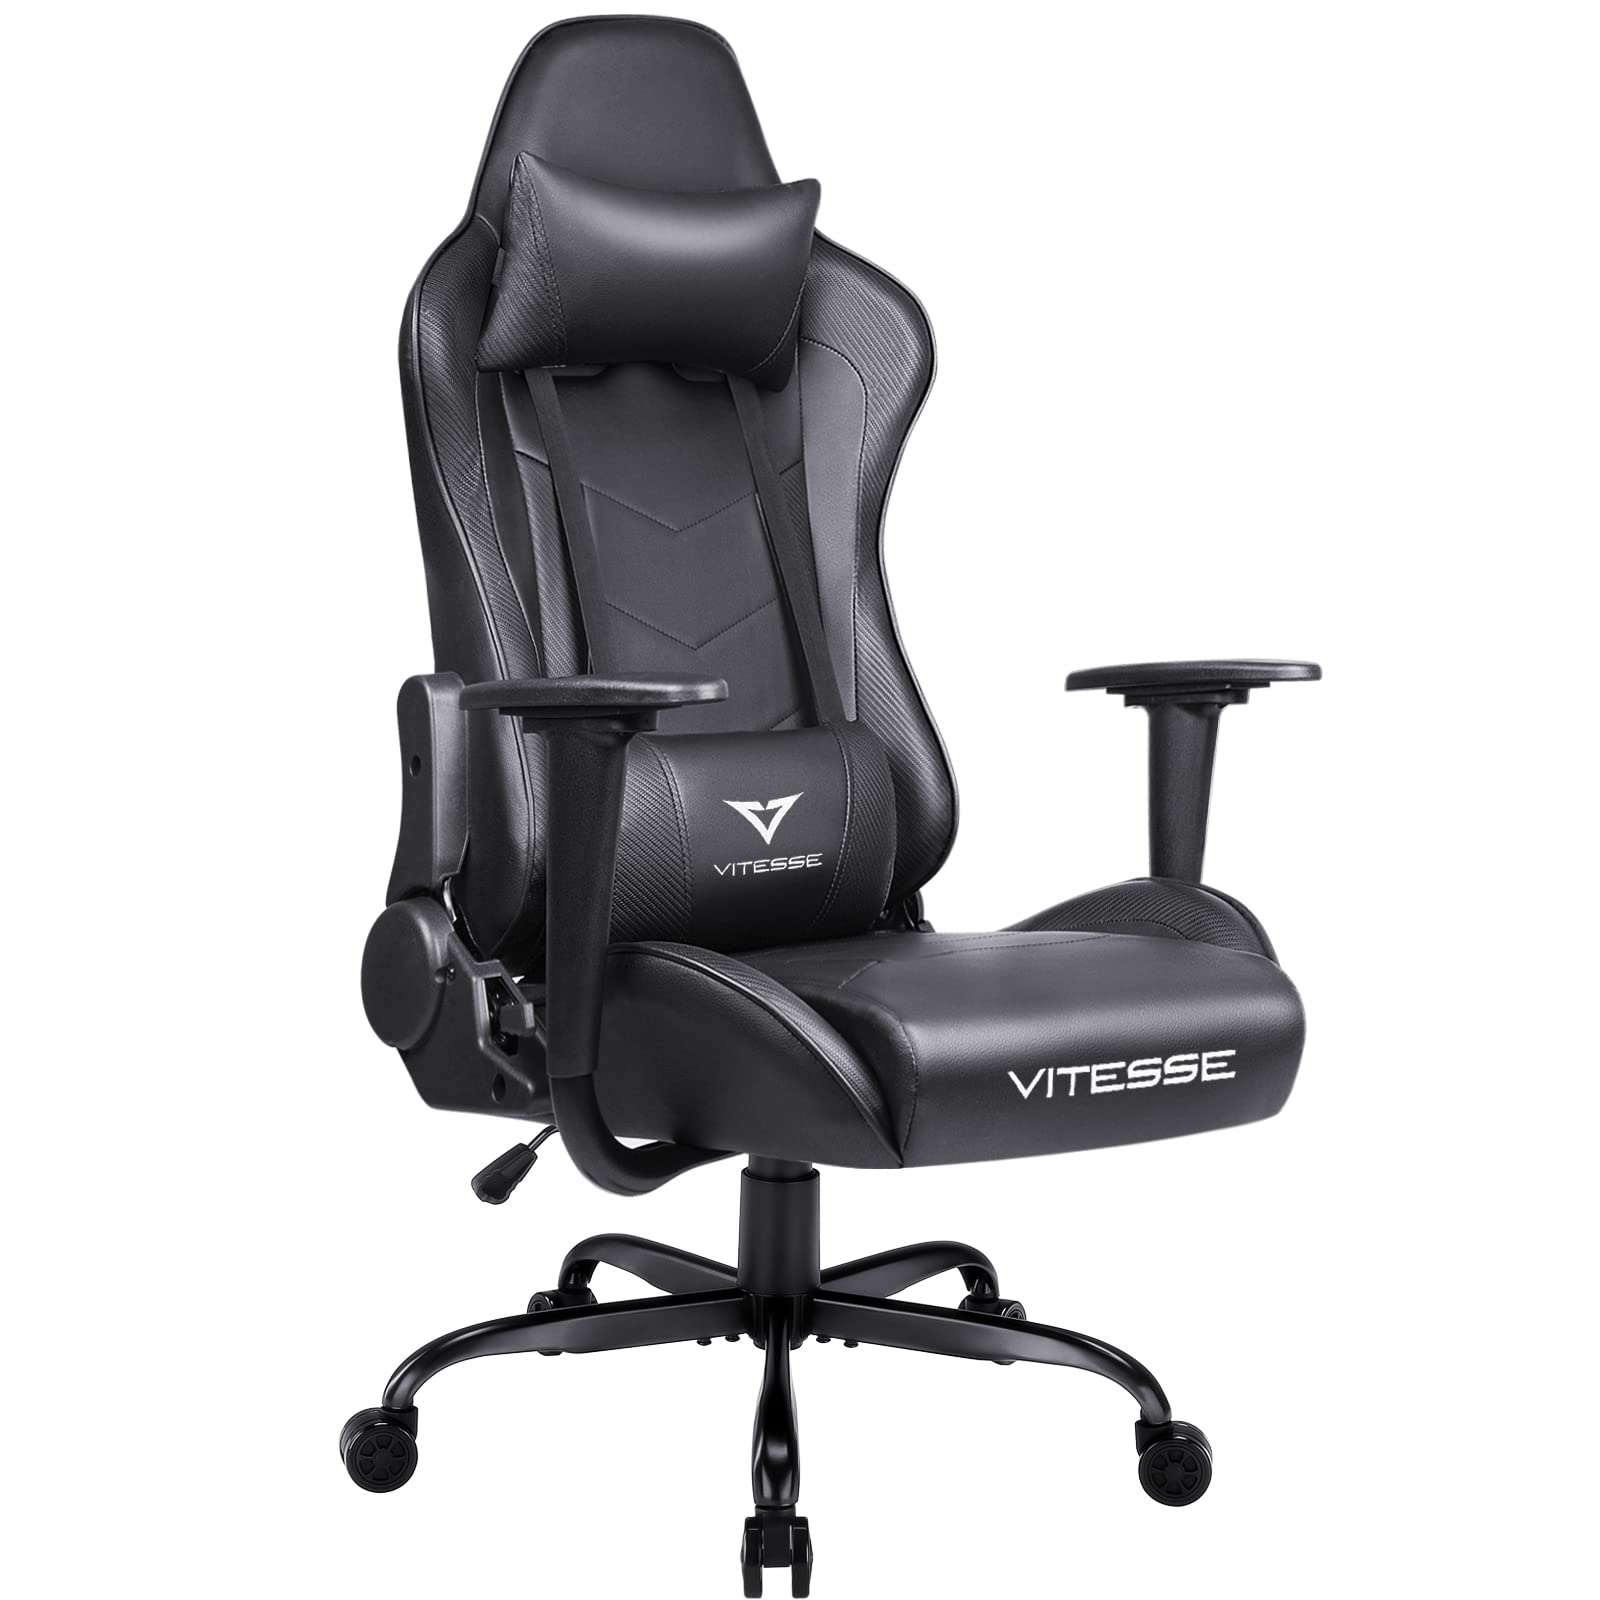 Vitesse Gaming Chair Sillas Gaming Racing Style Computer Gaming Chairs for Adults Ergonomic Desk Comfortable Chair High Back Swivel Executive Leath...